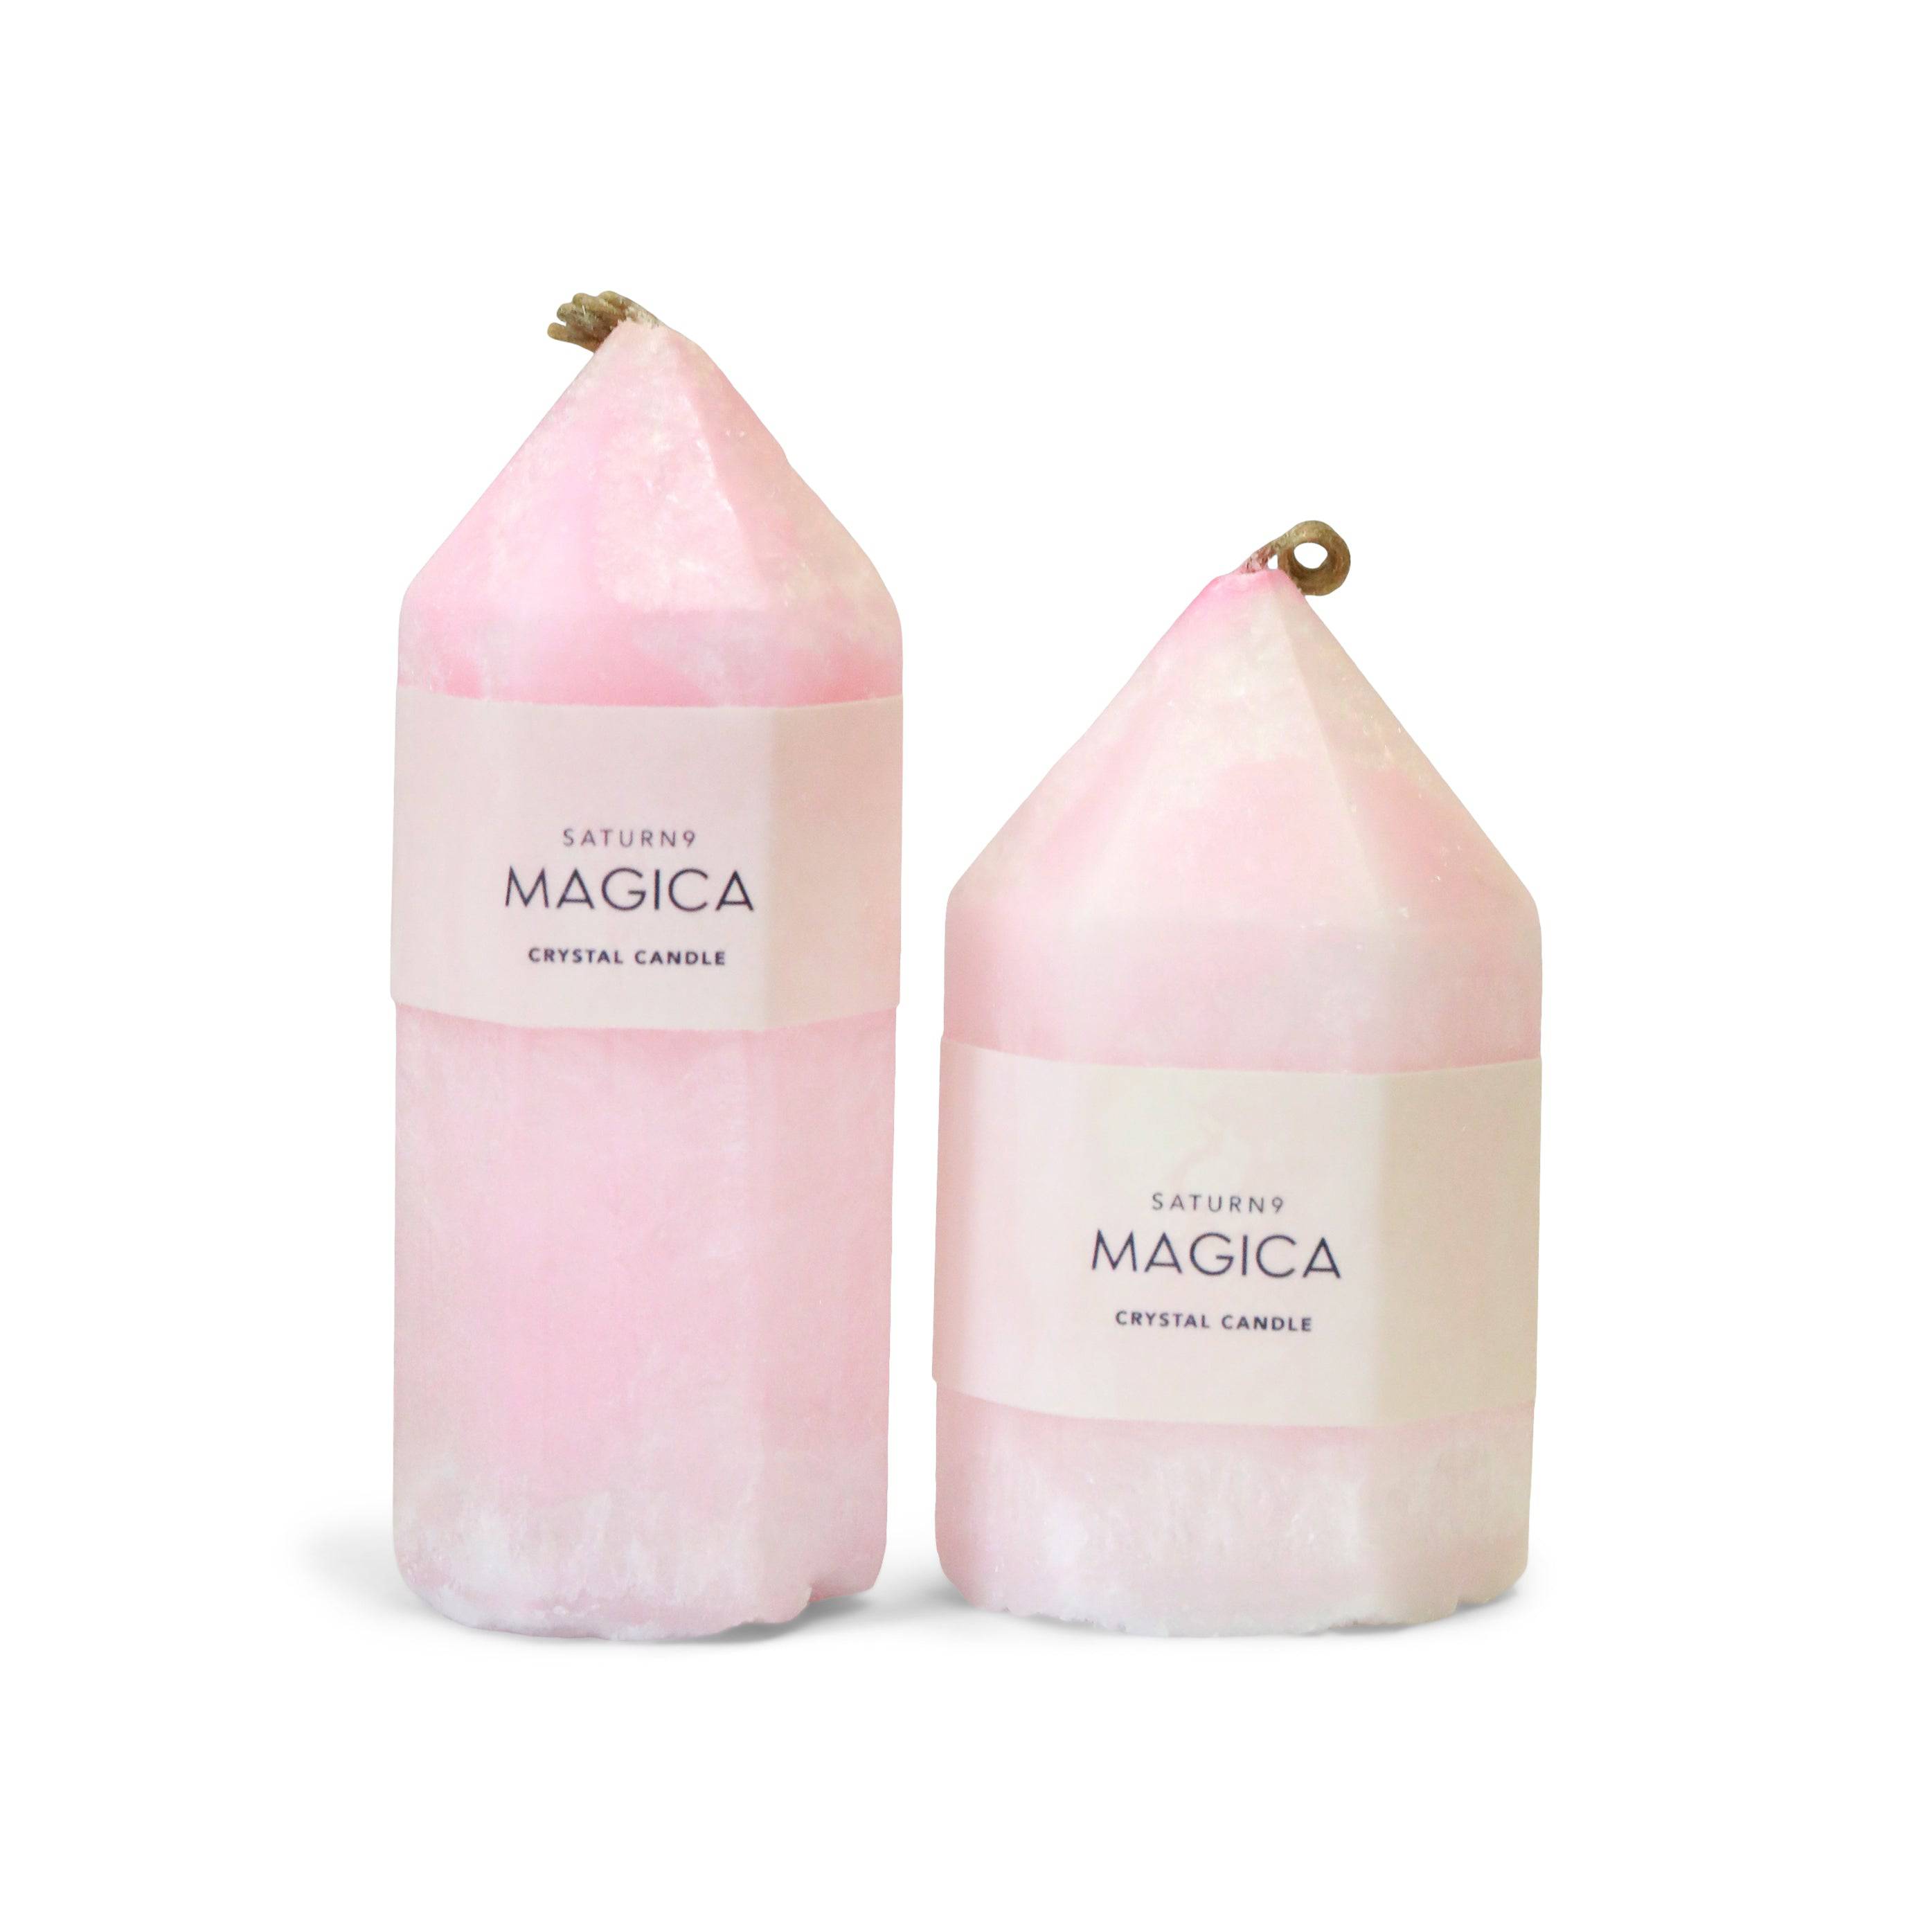 Rose Quartz Crystal Tower Pillar Candle - The Gilded Witch